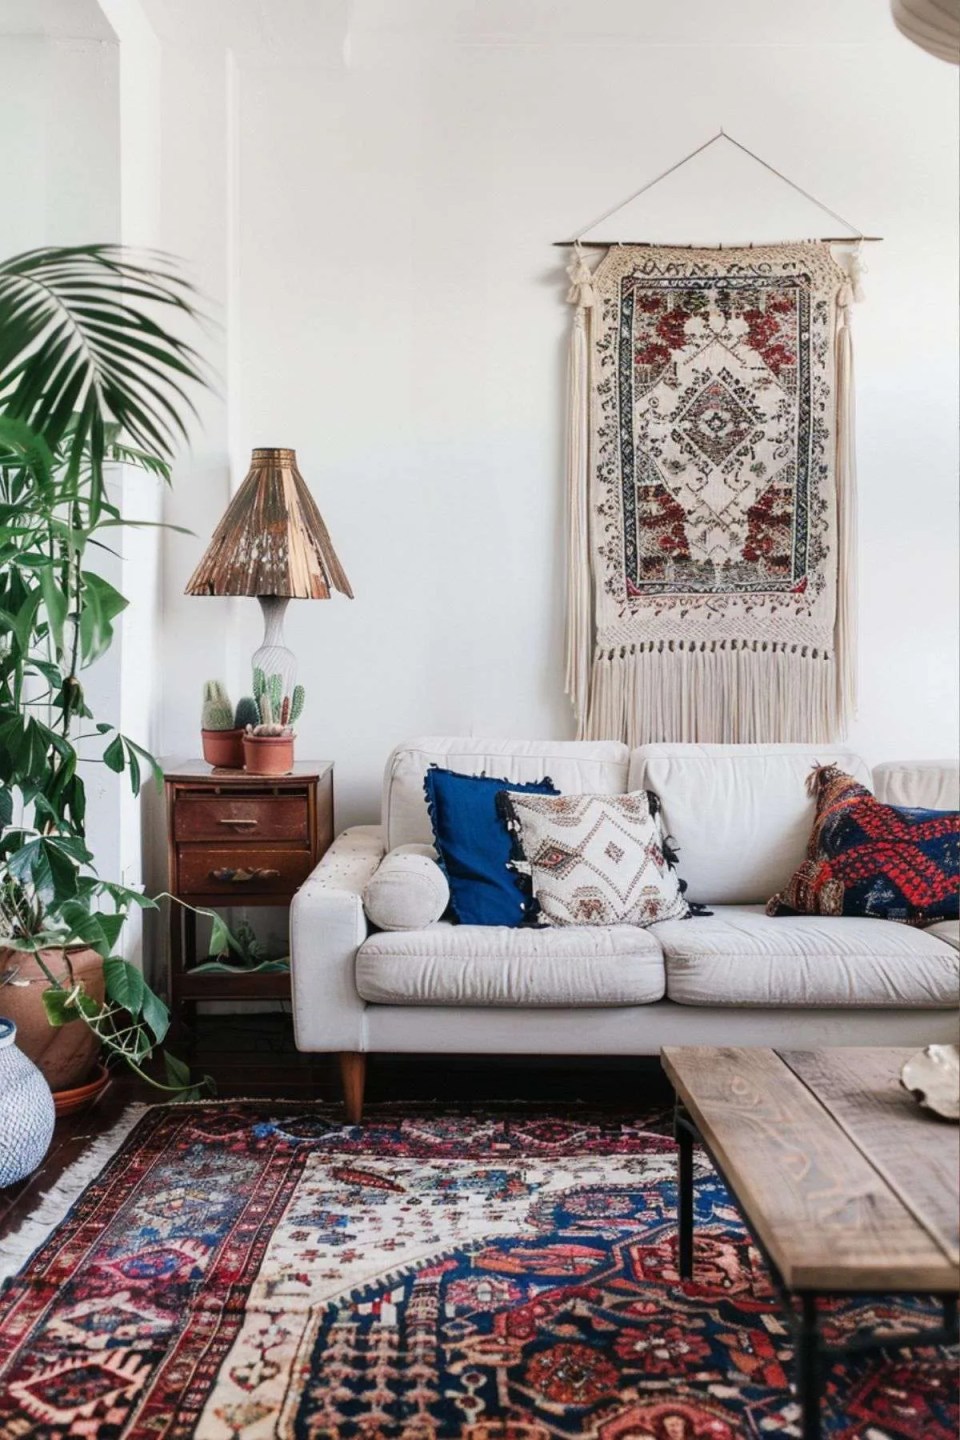 a room with cultural inspired decor, macrame hangings and persian rug